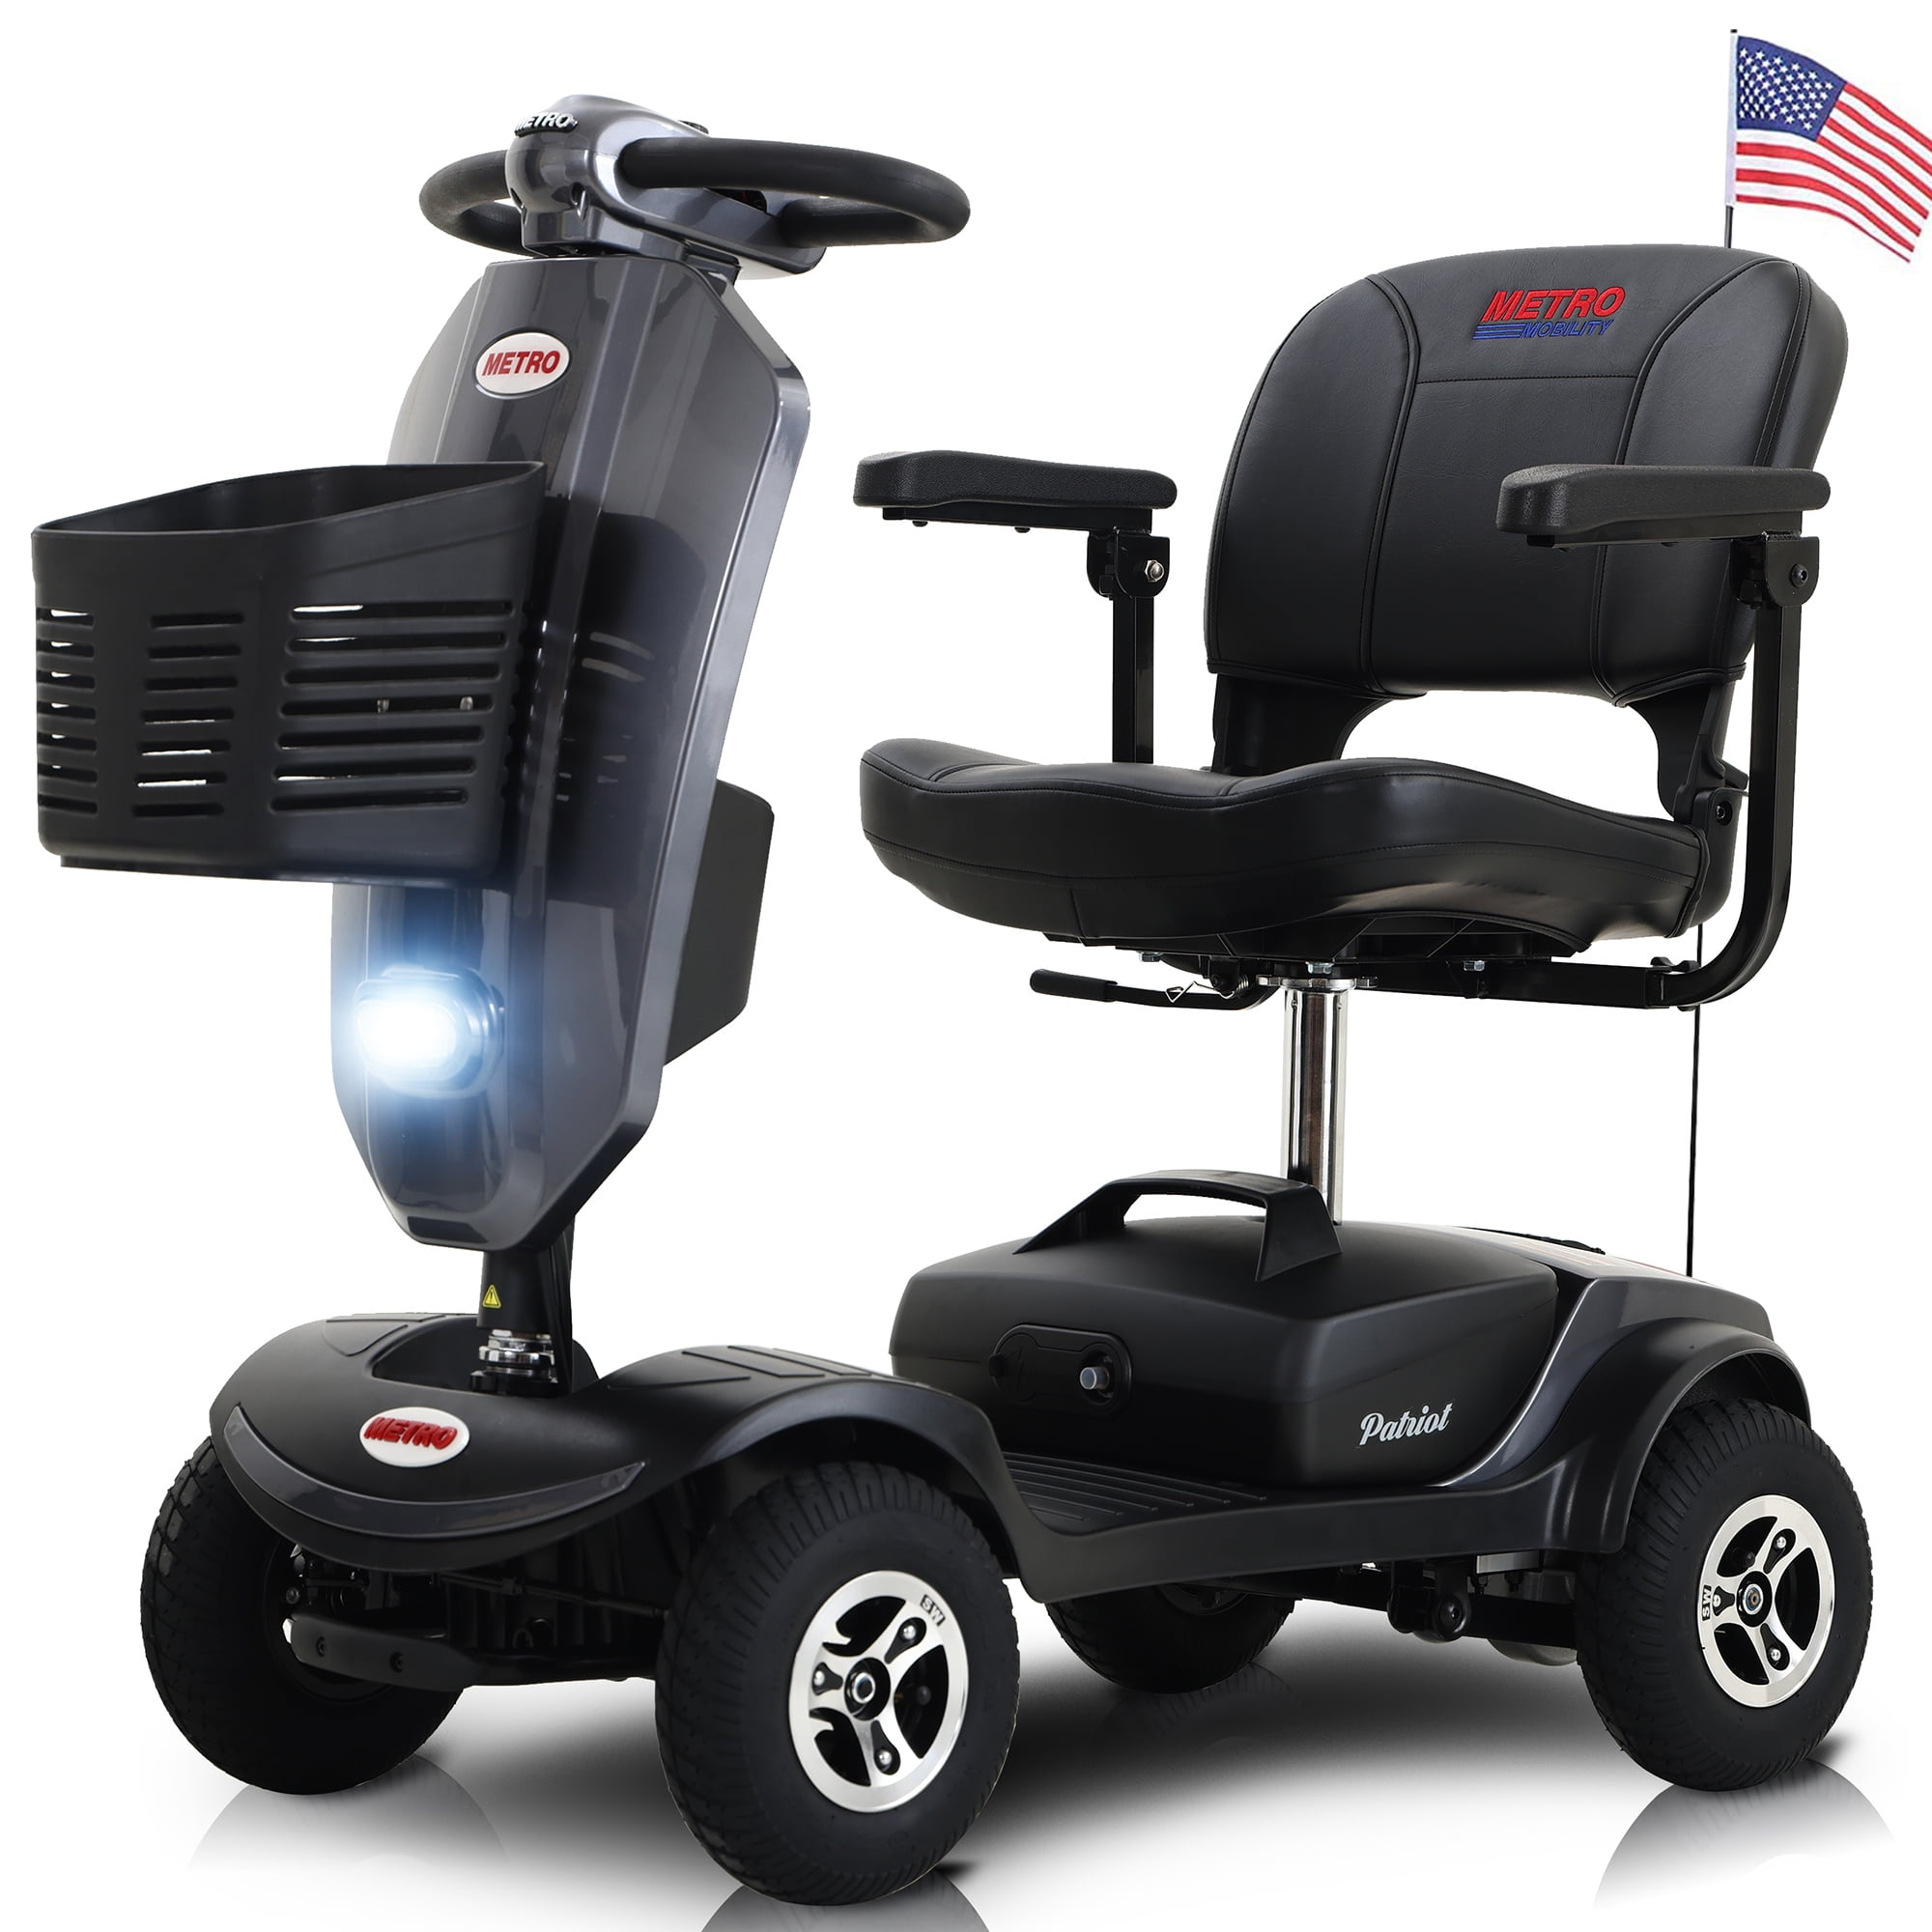 Mobility Scooter for Seniors, Motor Outdoor Anti-Tip 4 Wheel Electric Scooter with Windshield, Headlights & Rear LED Light, Cup Holder, USB Charging Port, Gift Flag, 300lbs, Grey - Walmart.com